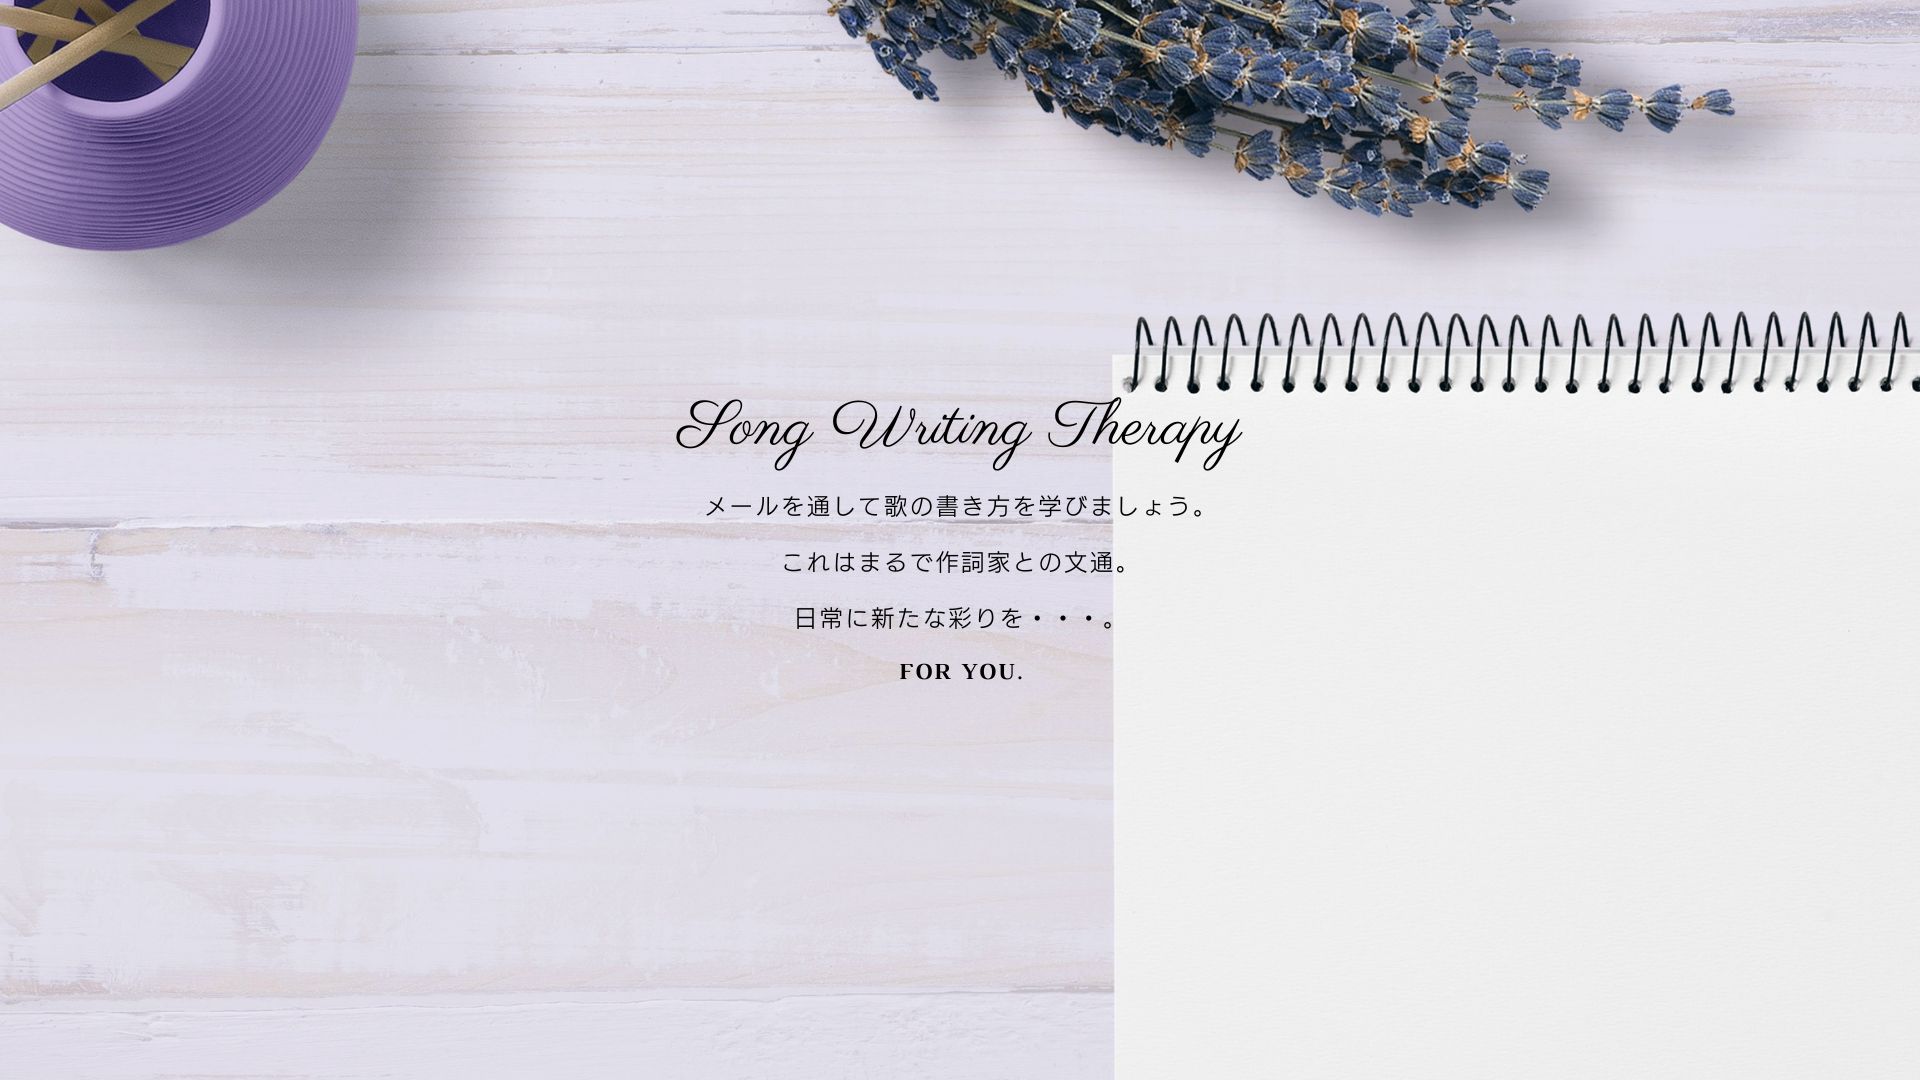 mail for you song Writing Therapy 作詞家との文通作詞講座